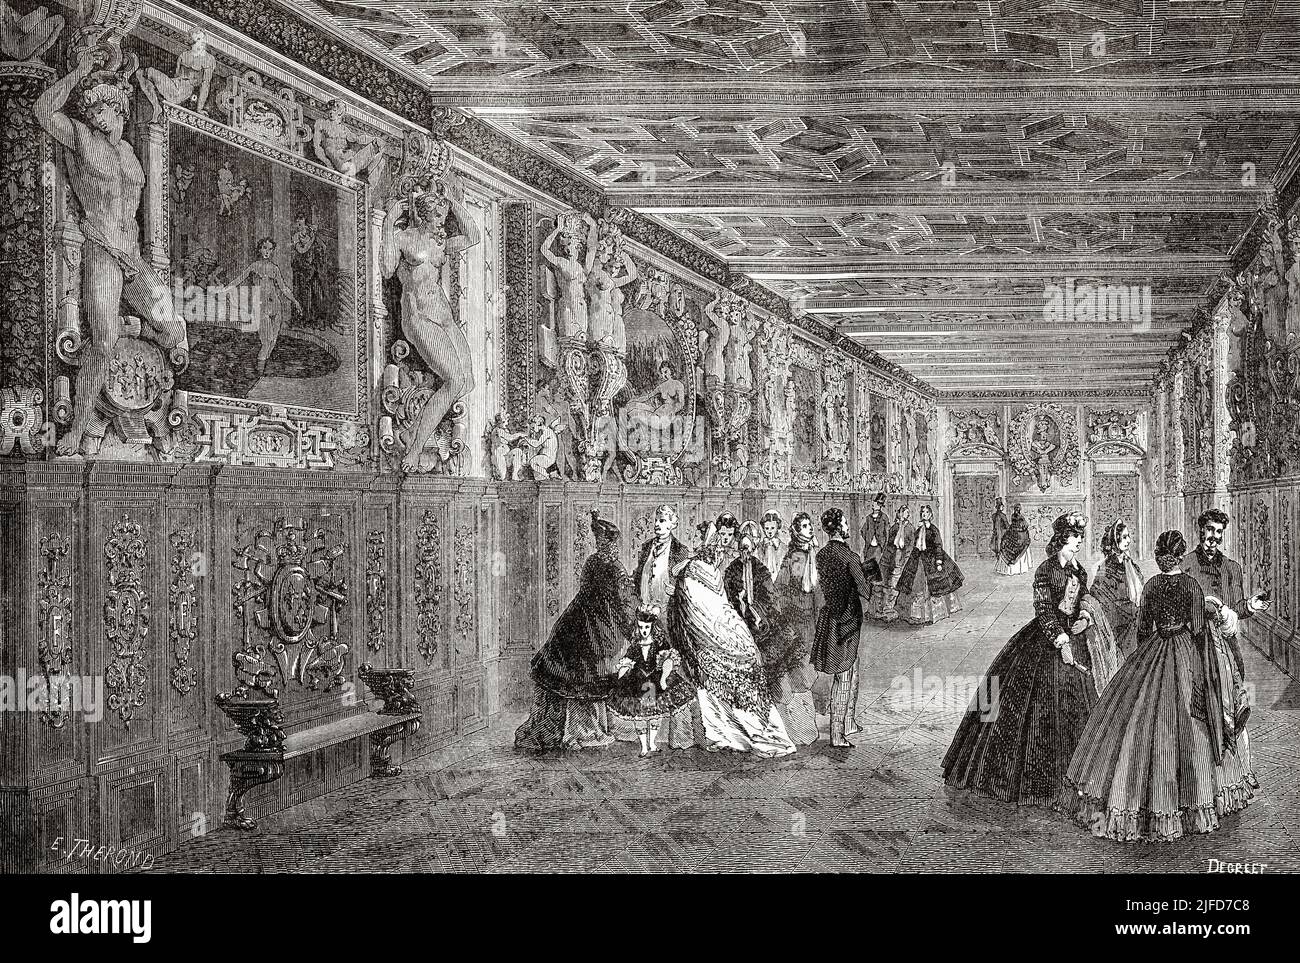 Francois I gallery, Fontainebleau palace. Seine-Et-Marne, France. Europe. The Chateau and Forest of Fontainebleau by Du Pays from Le Tour du Monde 1867 Stock Photo